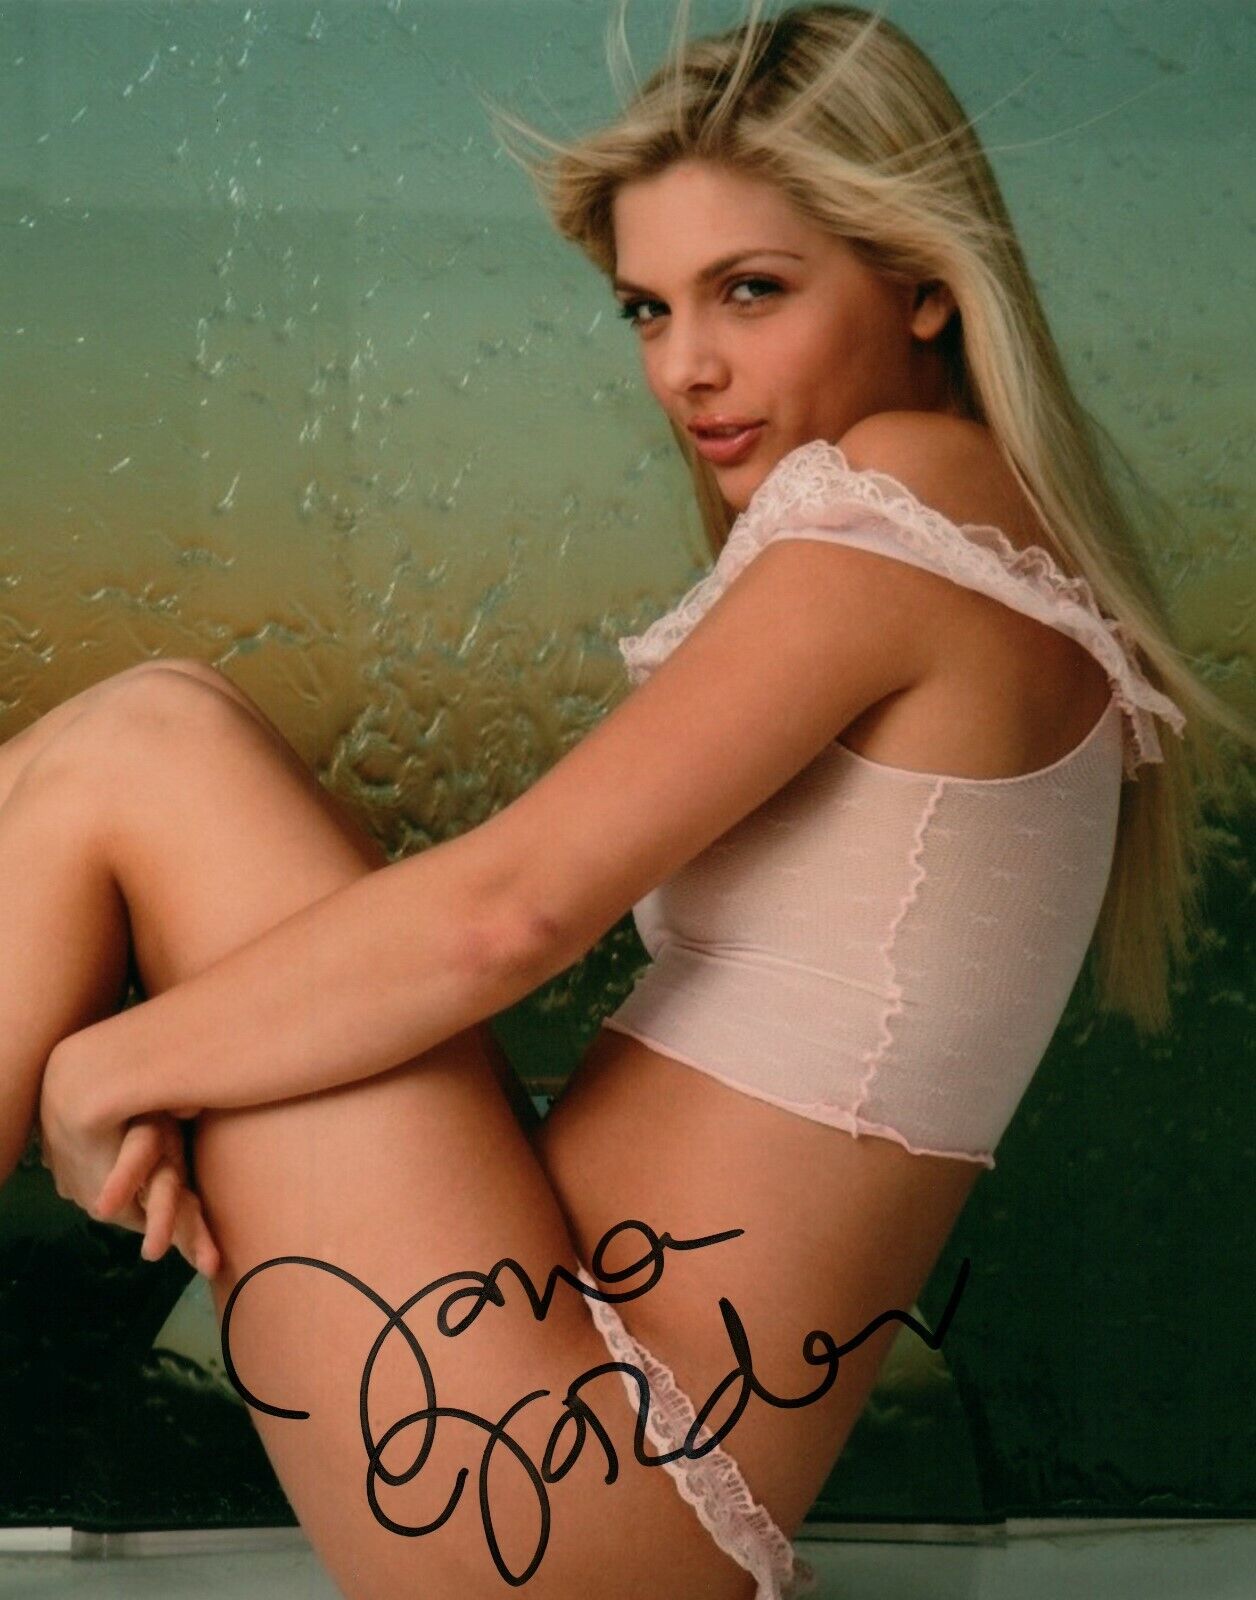 Jana Jordan Super Sexy Hot In Lingerie Signed 8x10 Photo Poster painting Adult Model COA 4